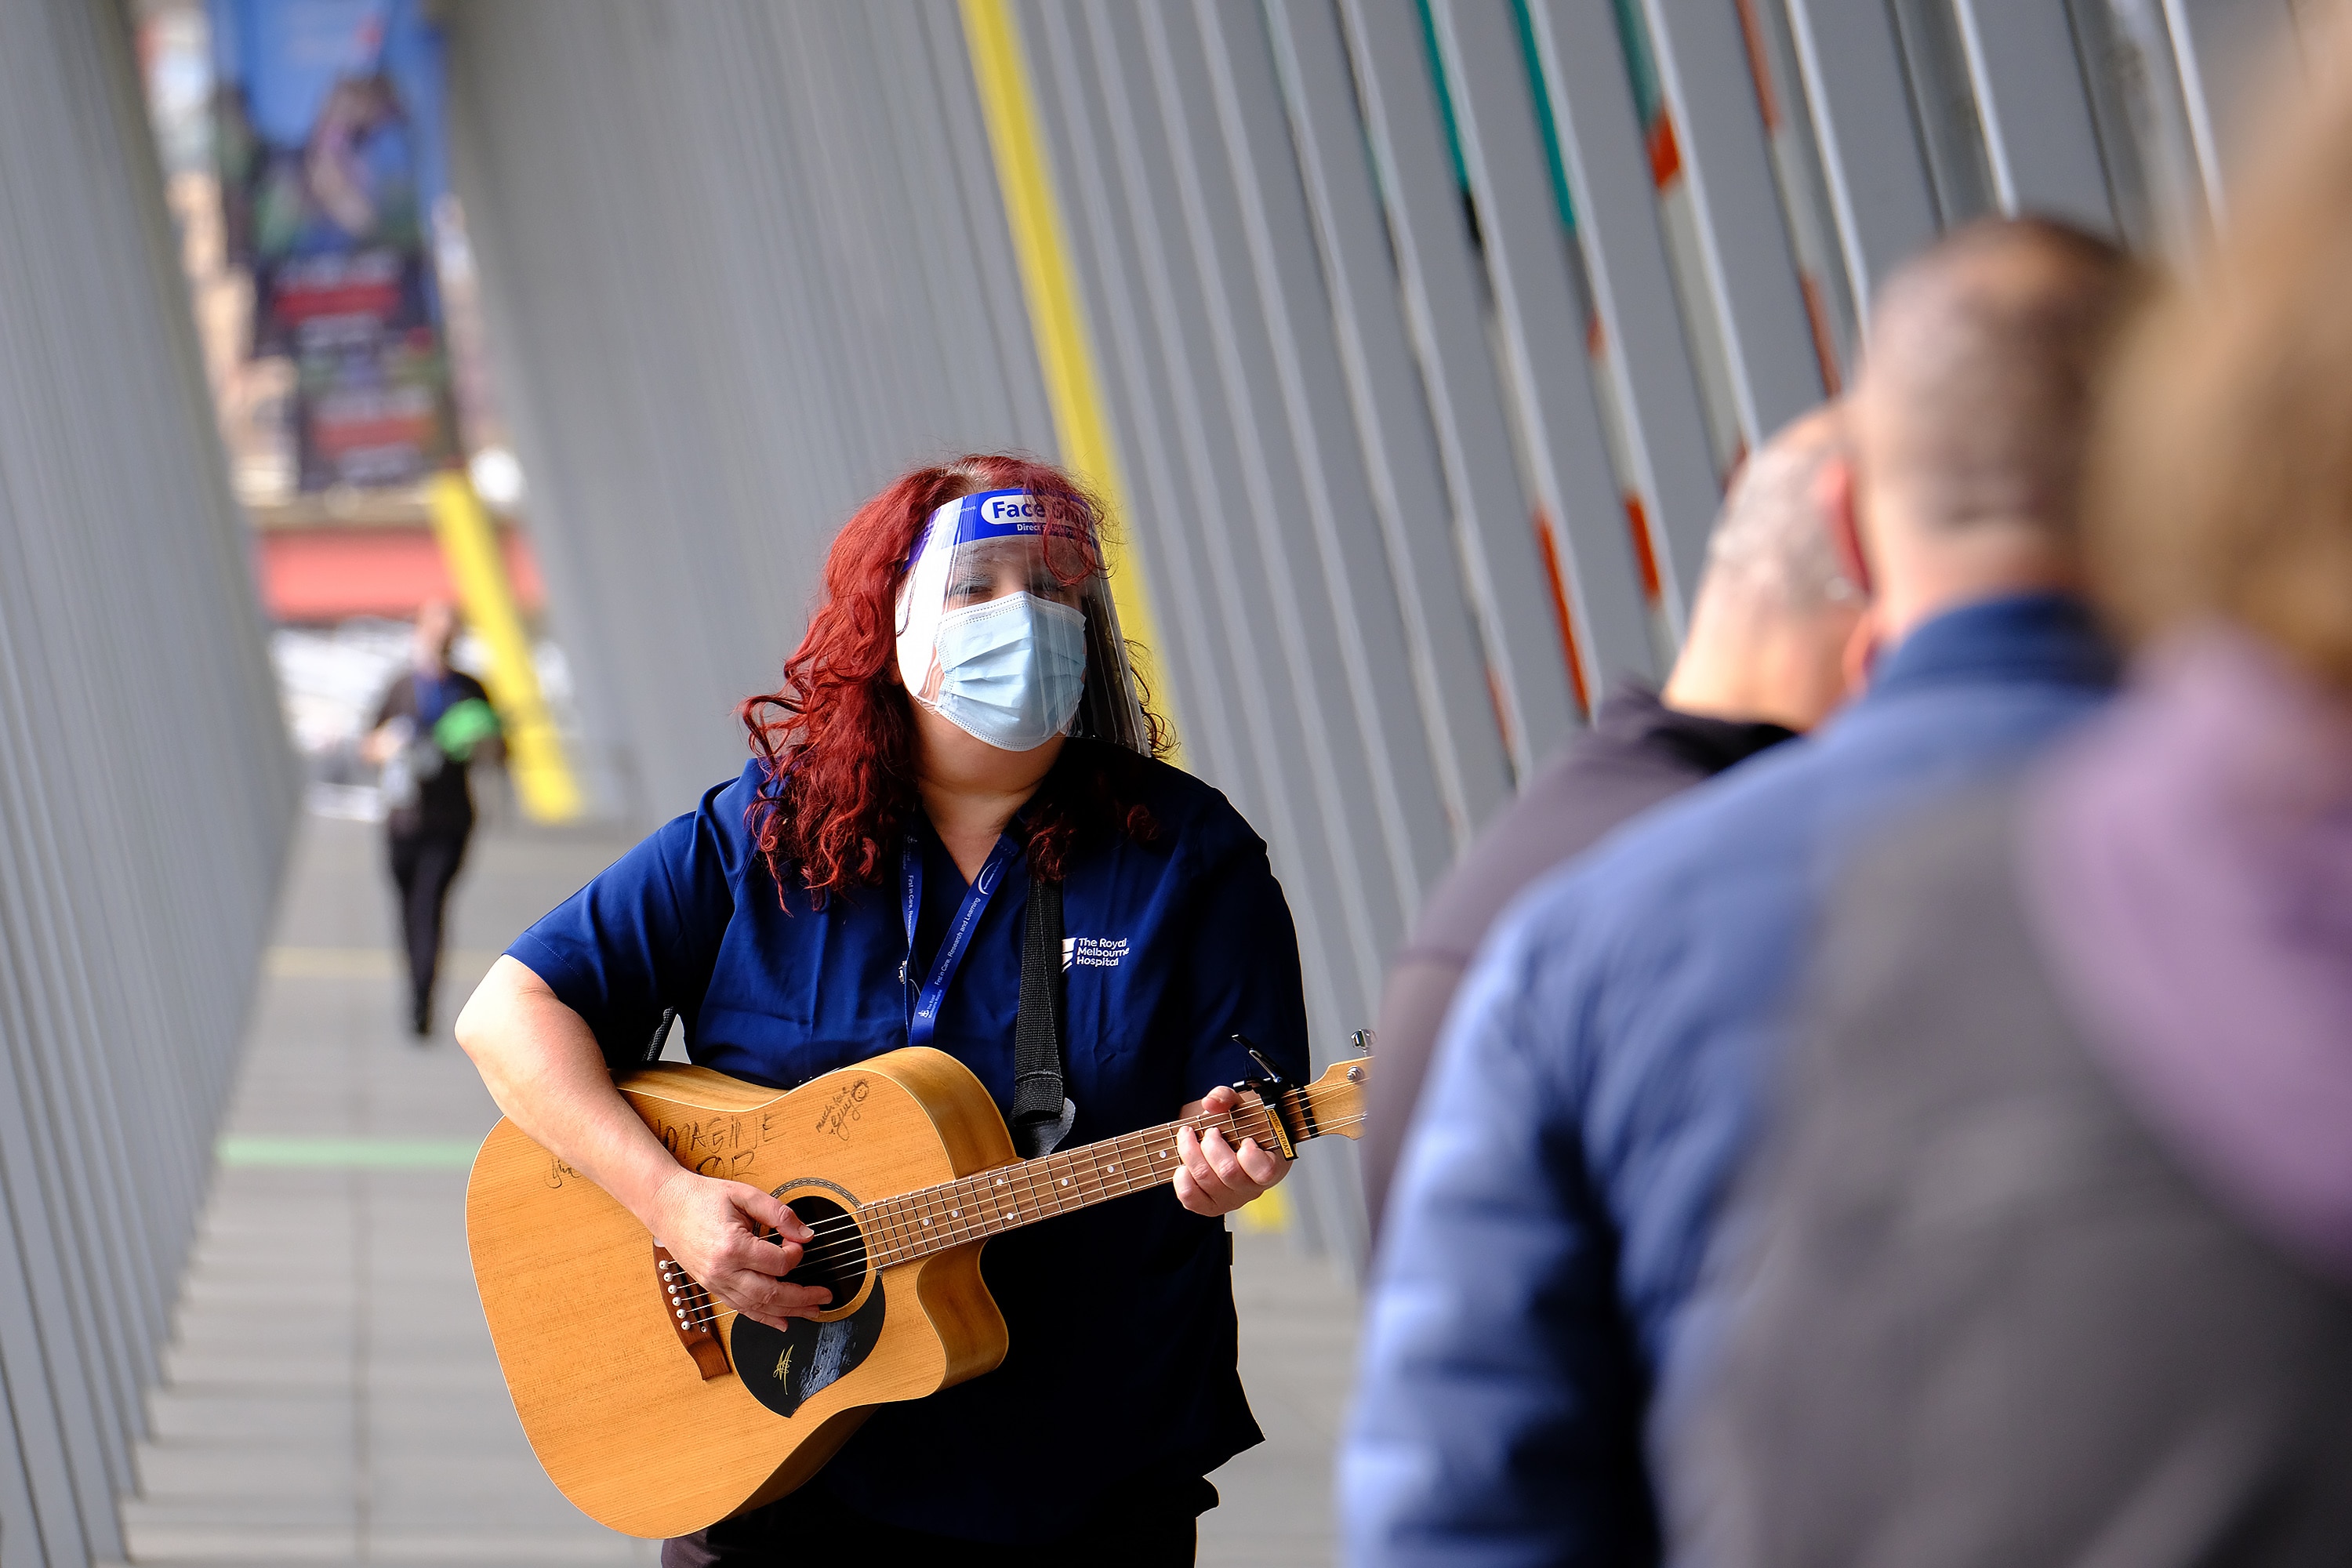 The Royal Melbourne Hospital's music therapy team were outside the Melbourne Convention and Exhibition Centre hub on Friday